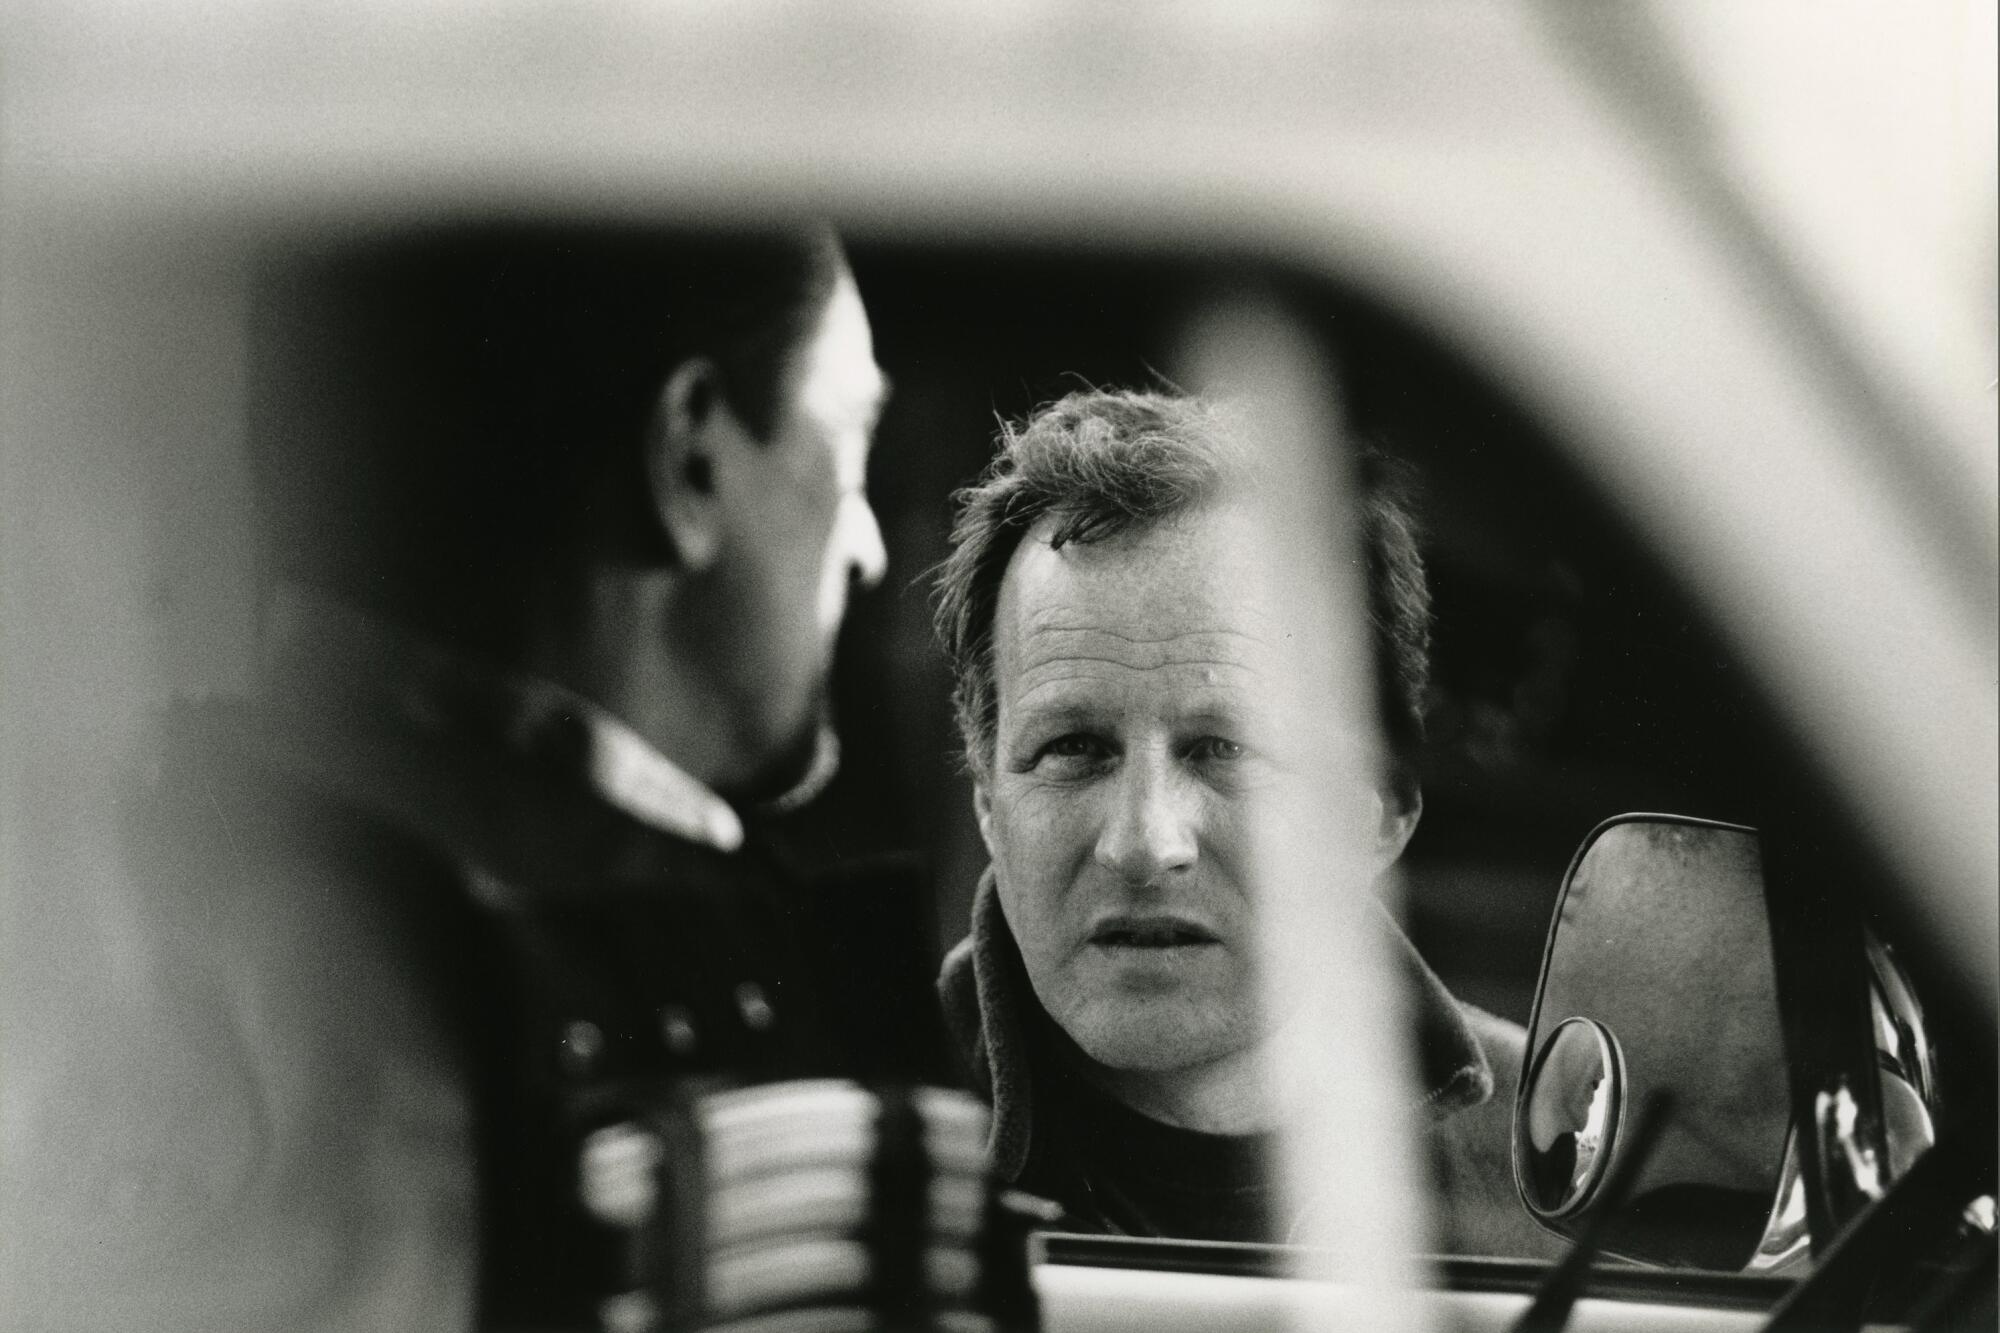 Black and white photo of a man at a drivers seat and a man looking into his window 